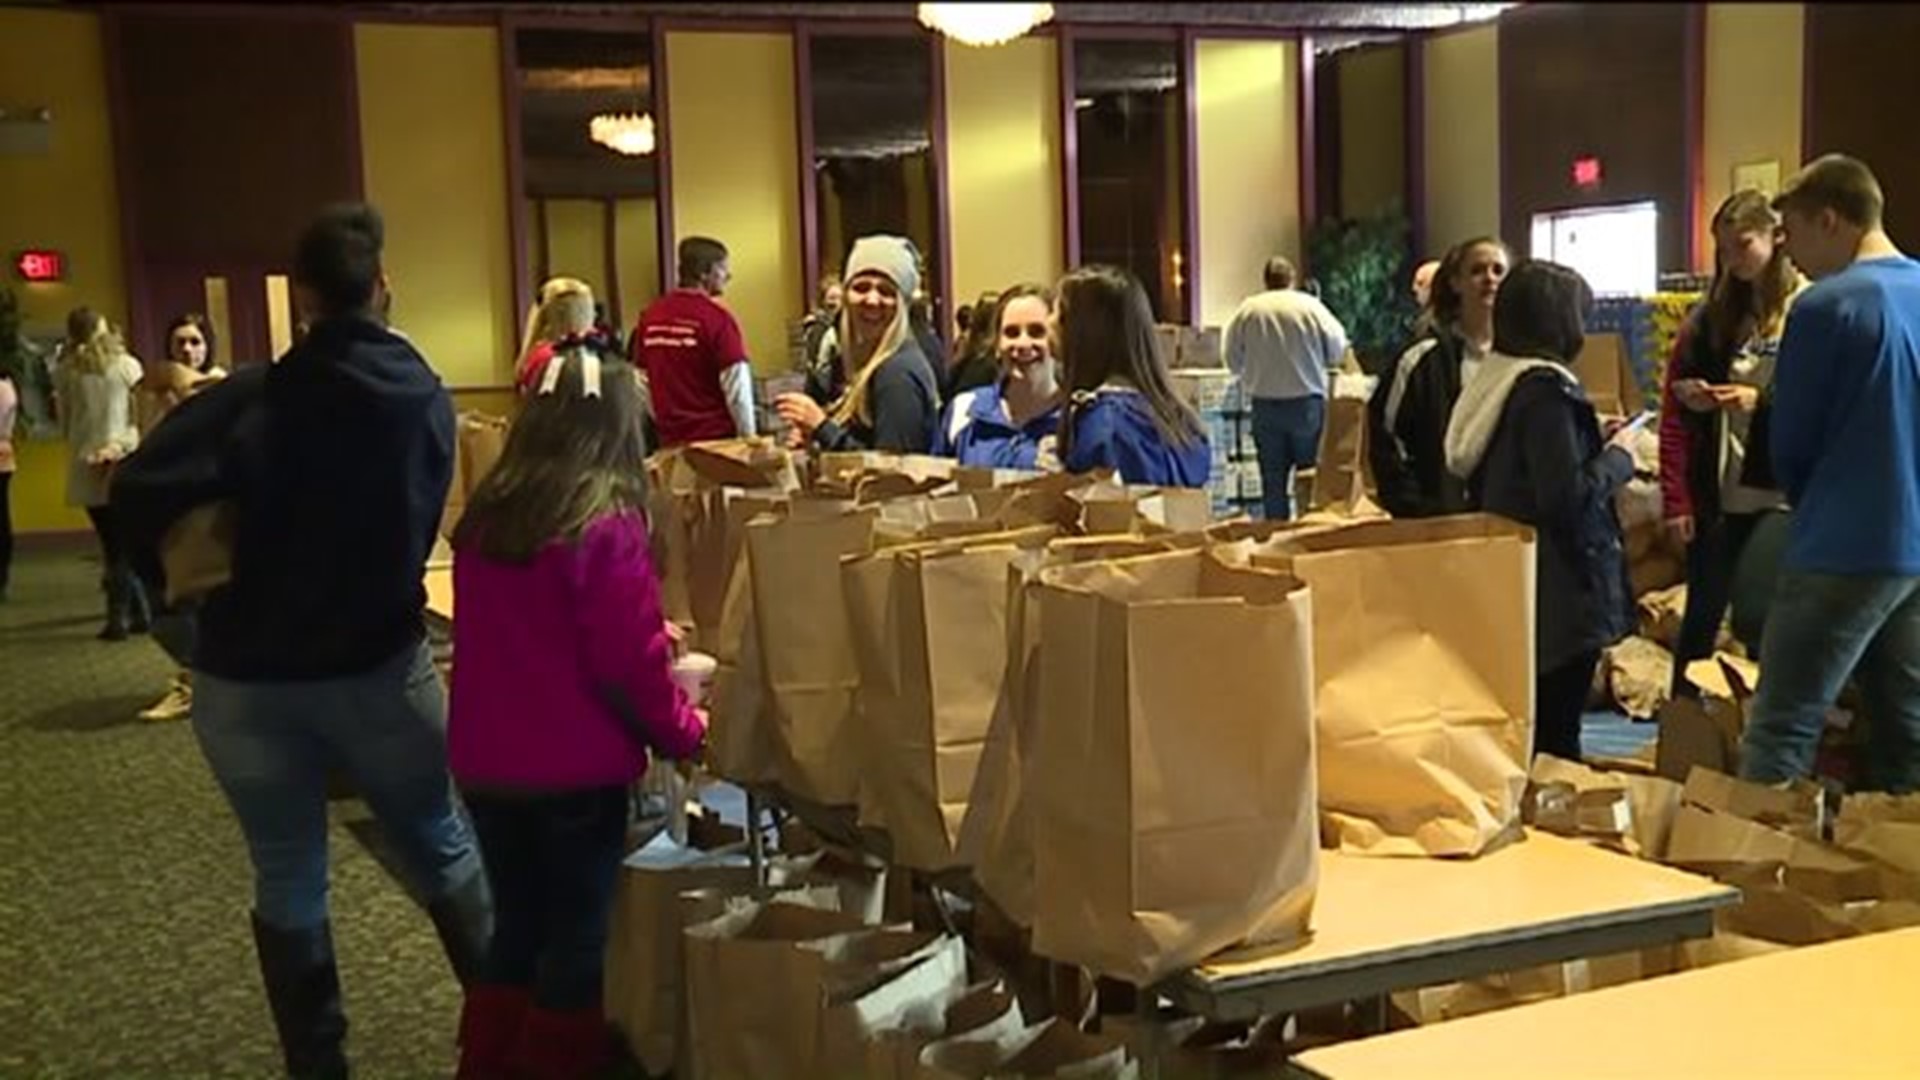 Feed A Friend Giveaway for More than 1,700 Families